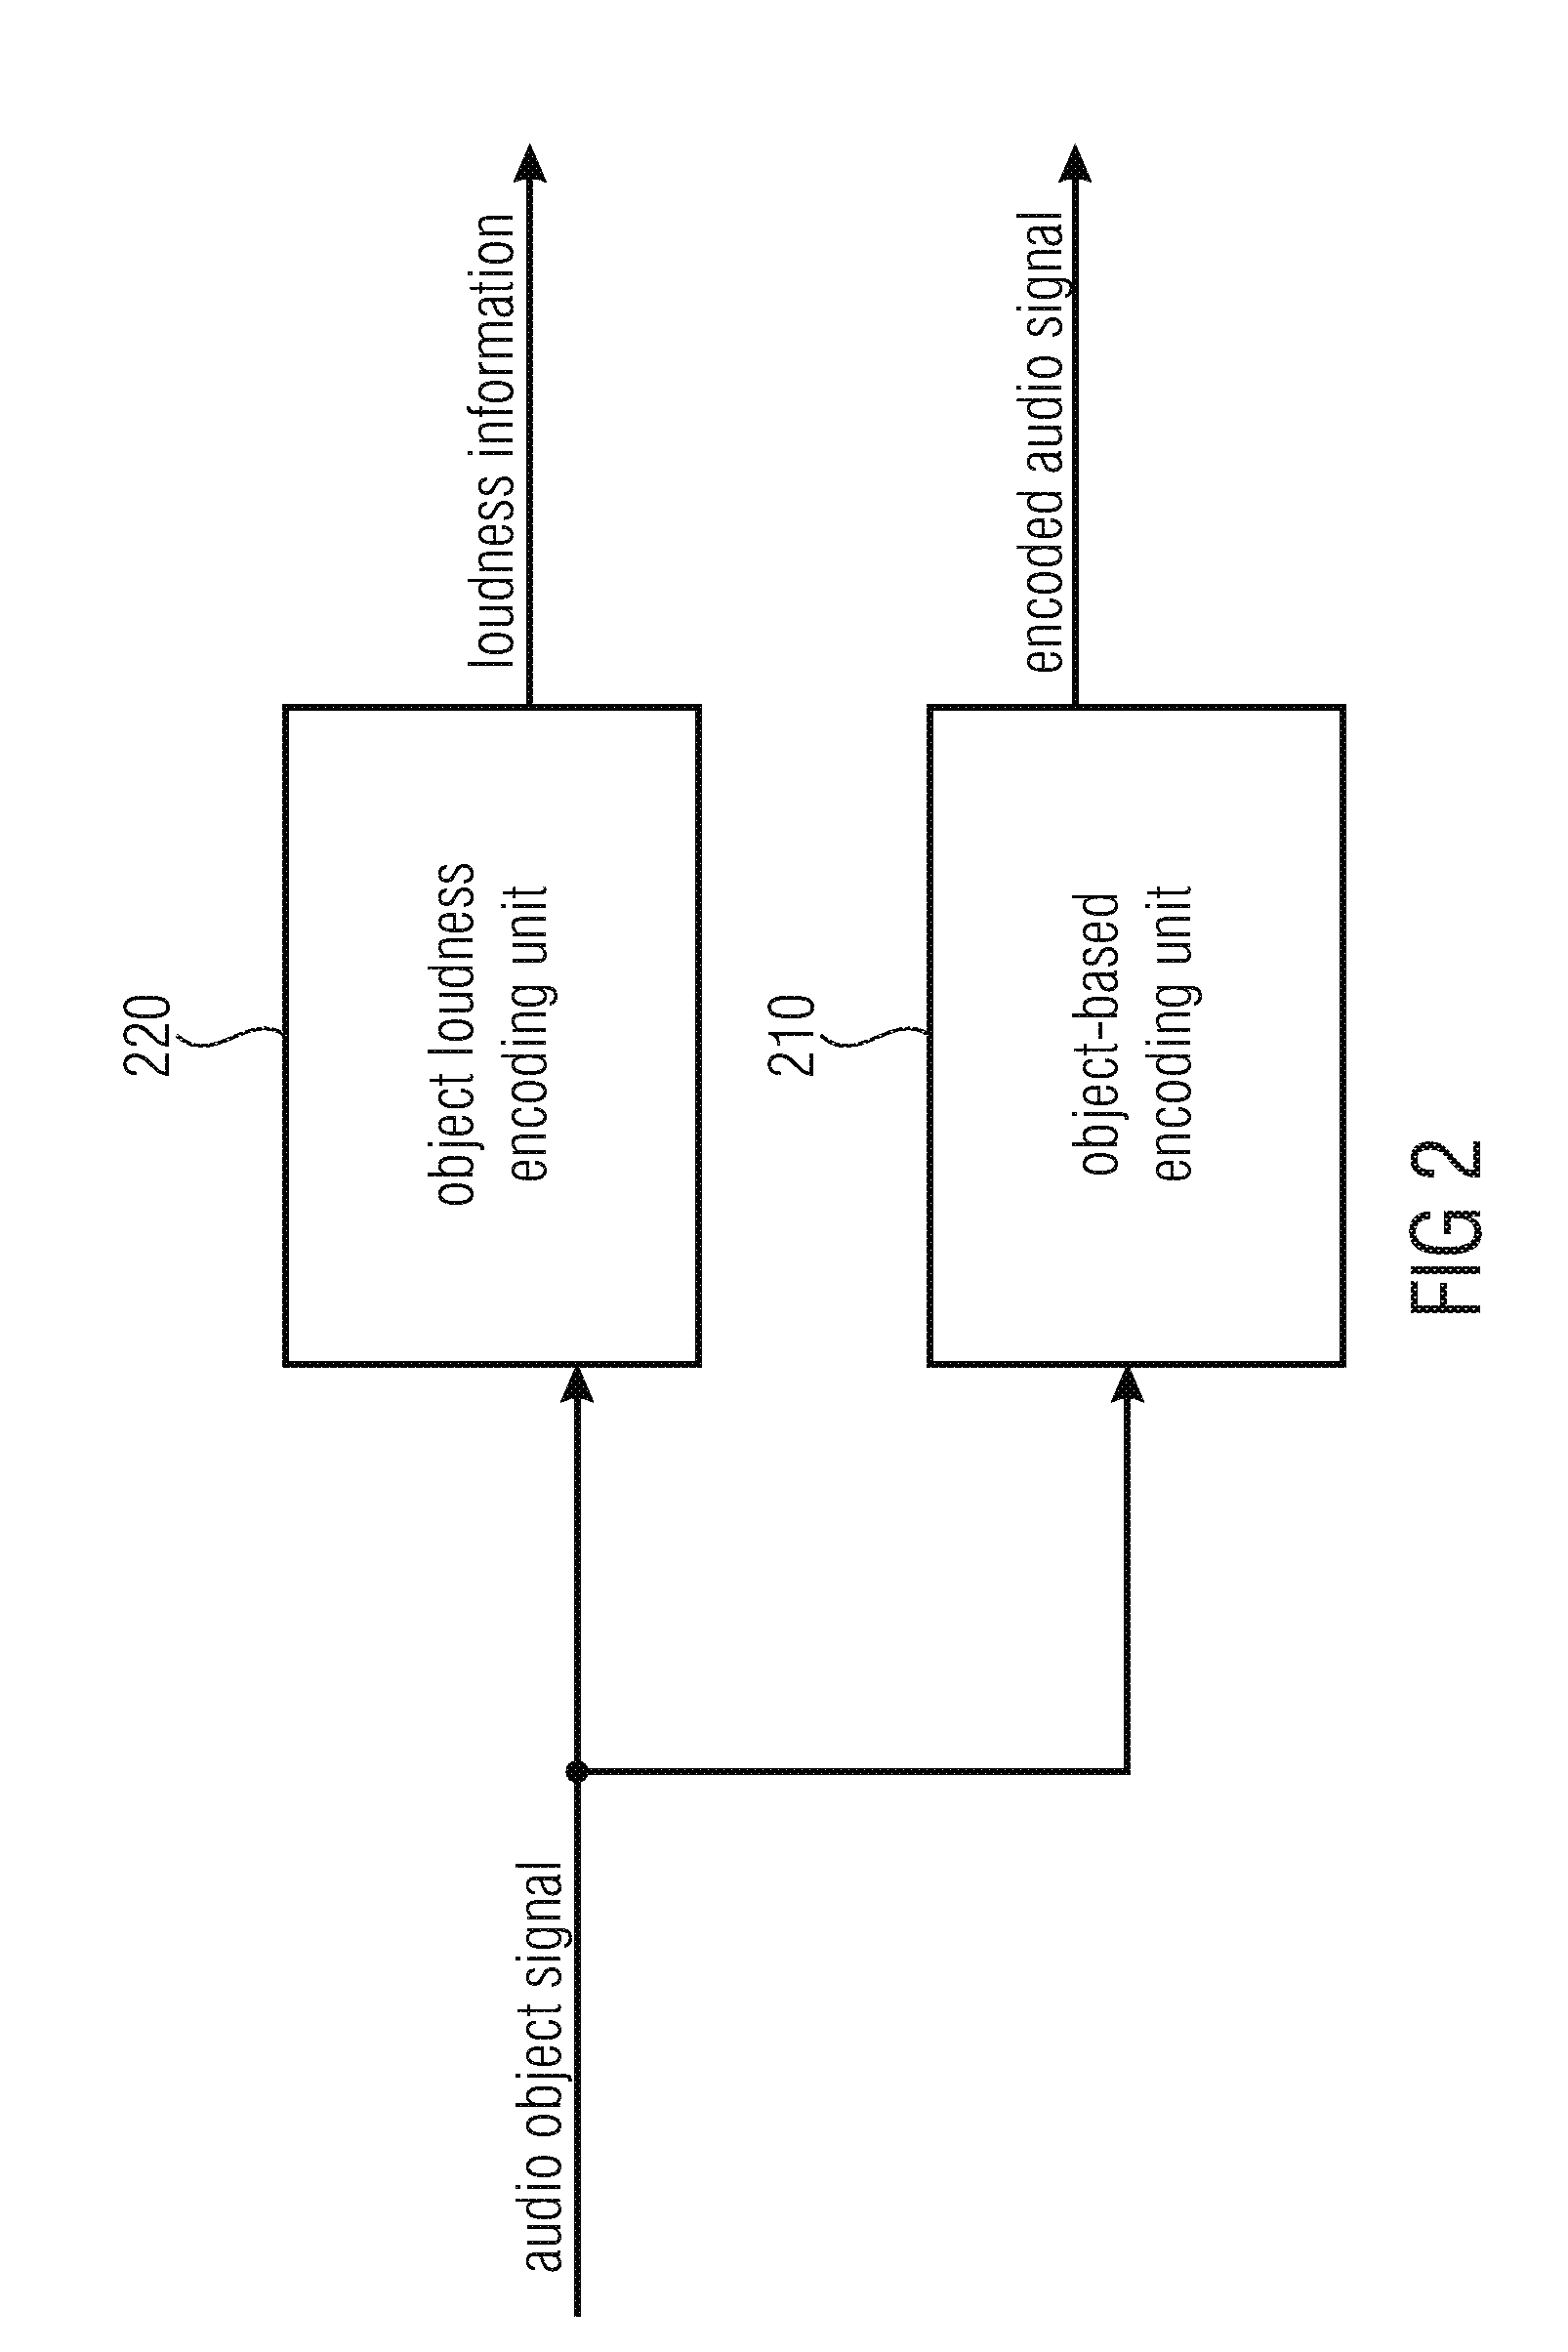 Decoder, encoder, and method for informed loudness estimation in object-based audio coding systems